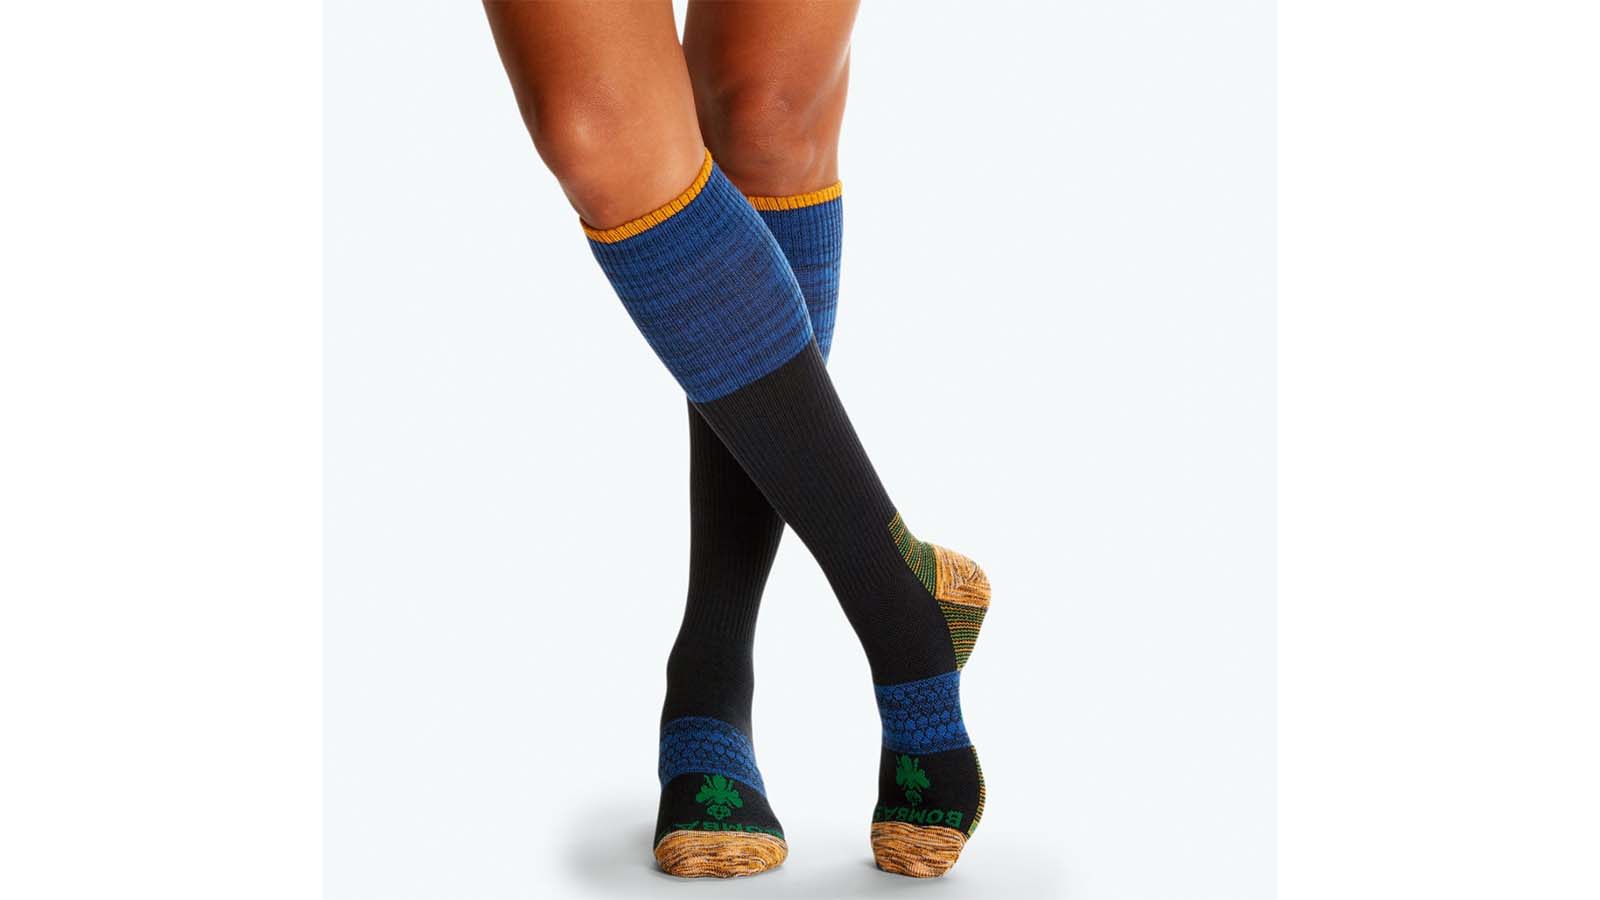 Fitlegs Compression Socks Reviews  Read Customer Service Reviews